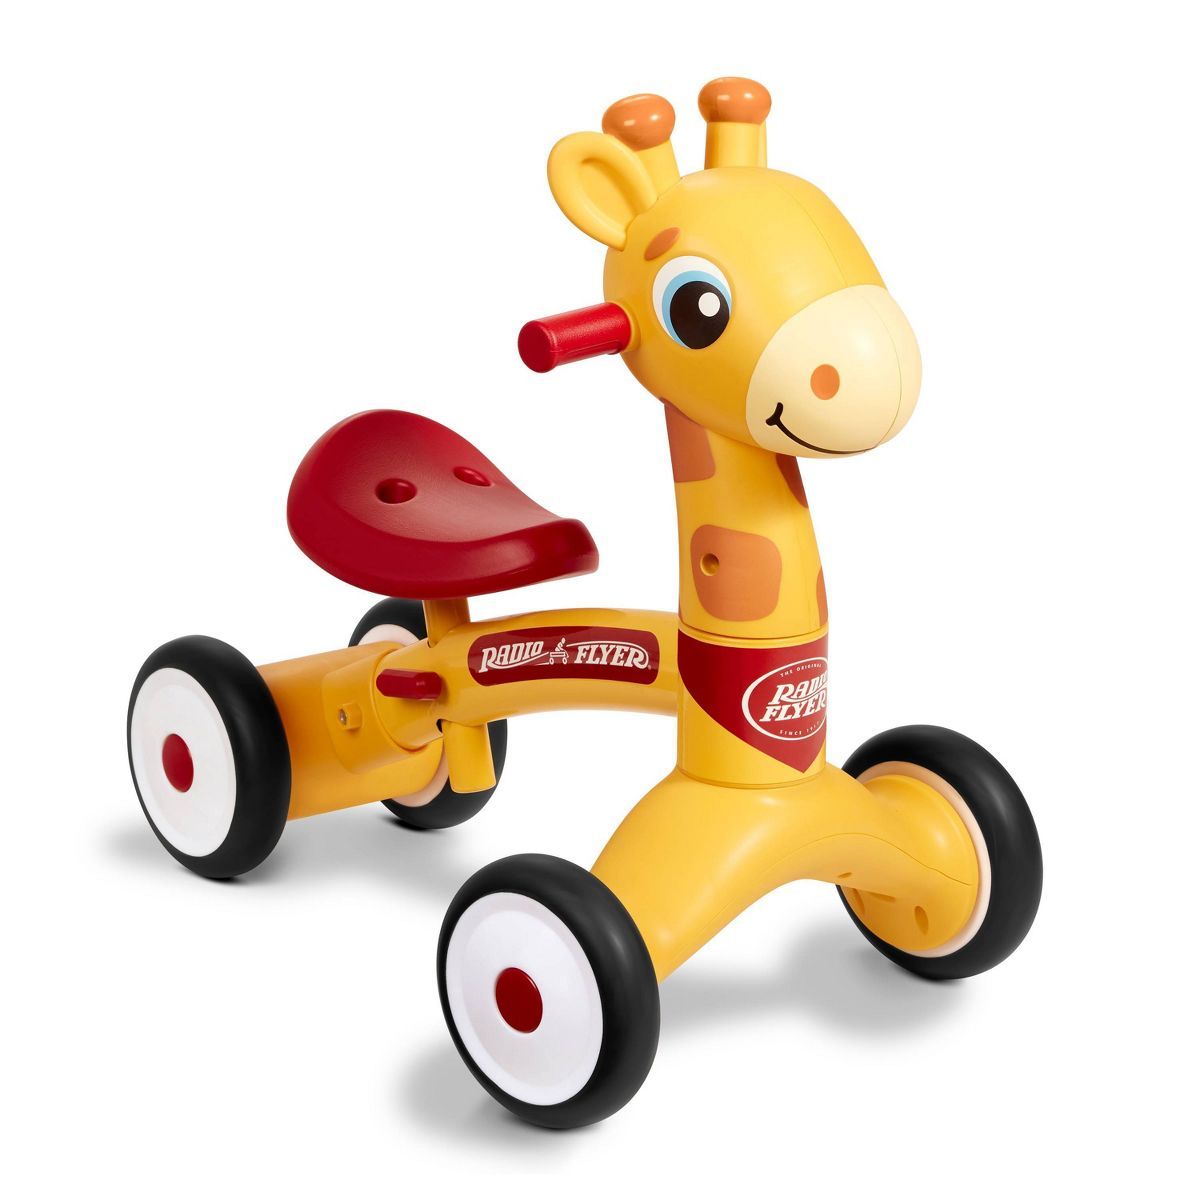 Radio Flyer Lil' Racers Patches the Giraffe | Target